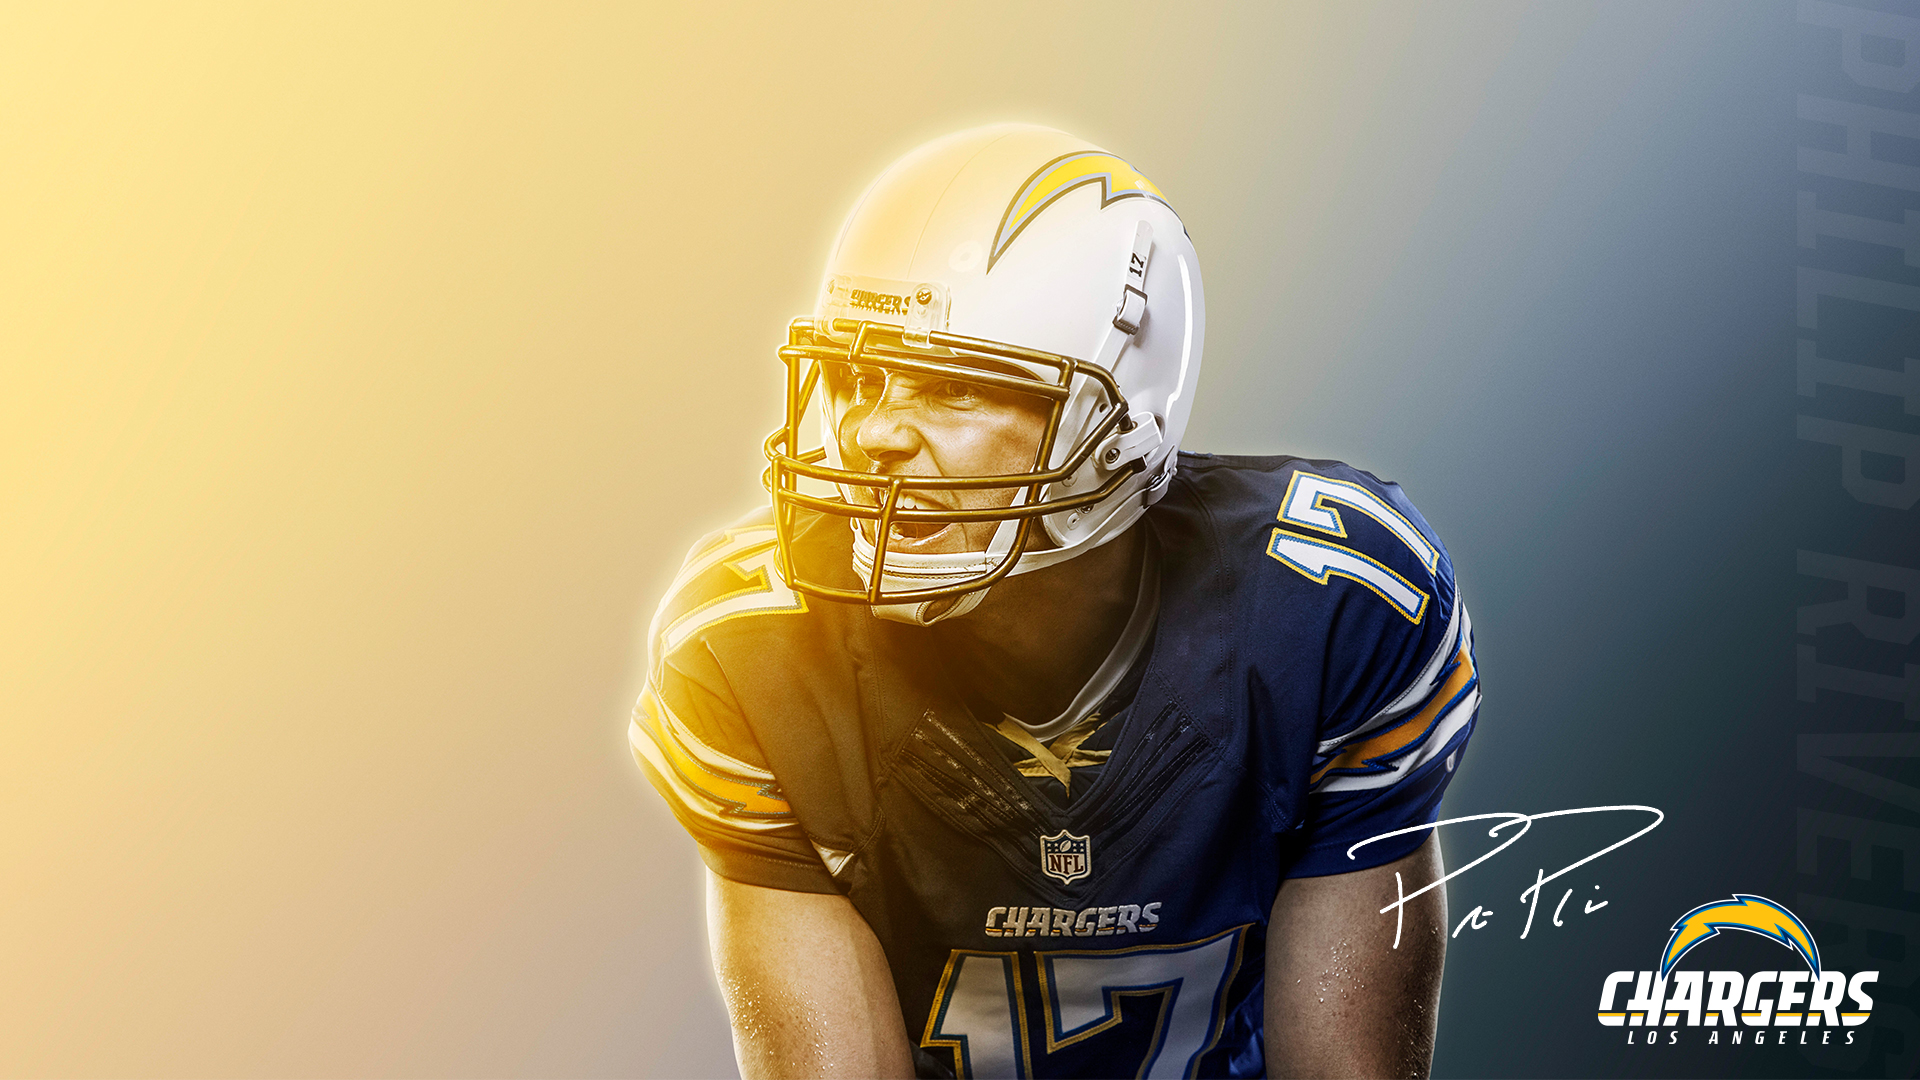 Los Angeles Chargers1920 x 1080